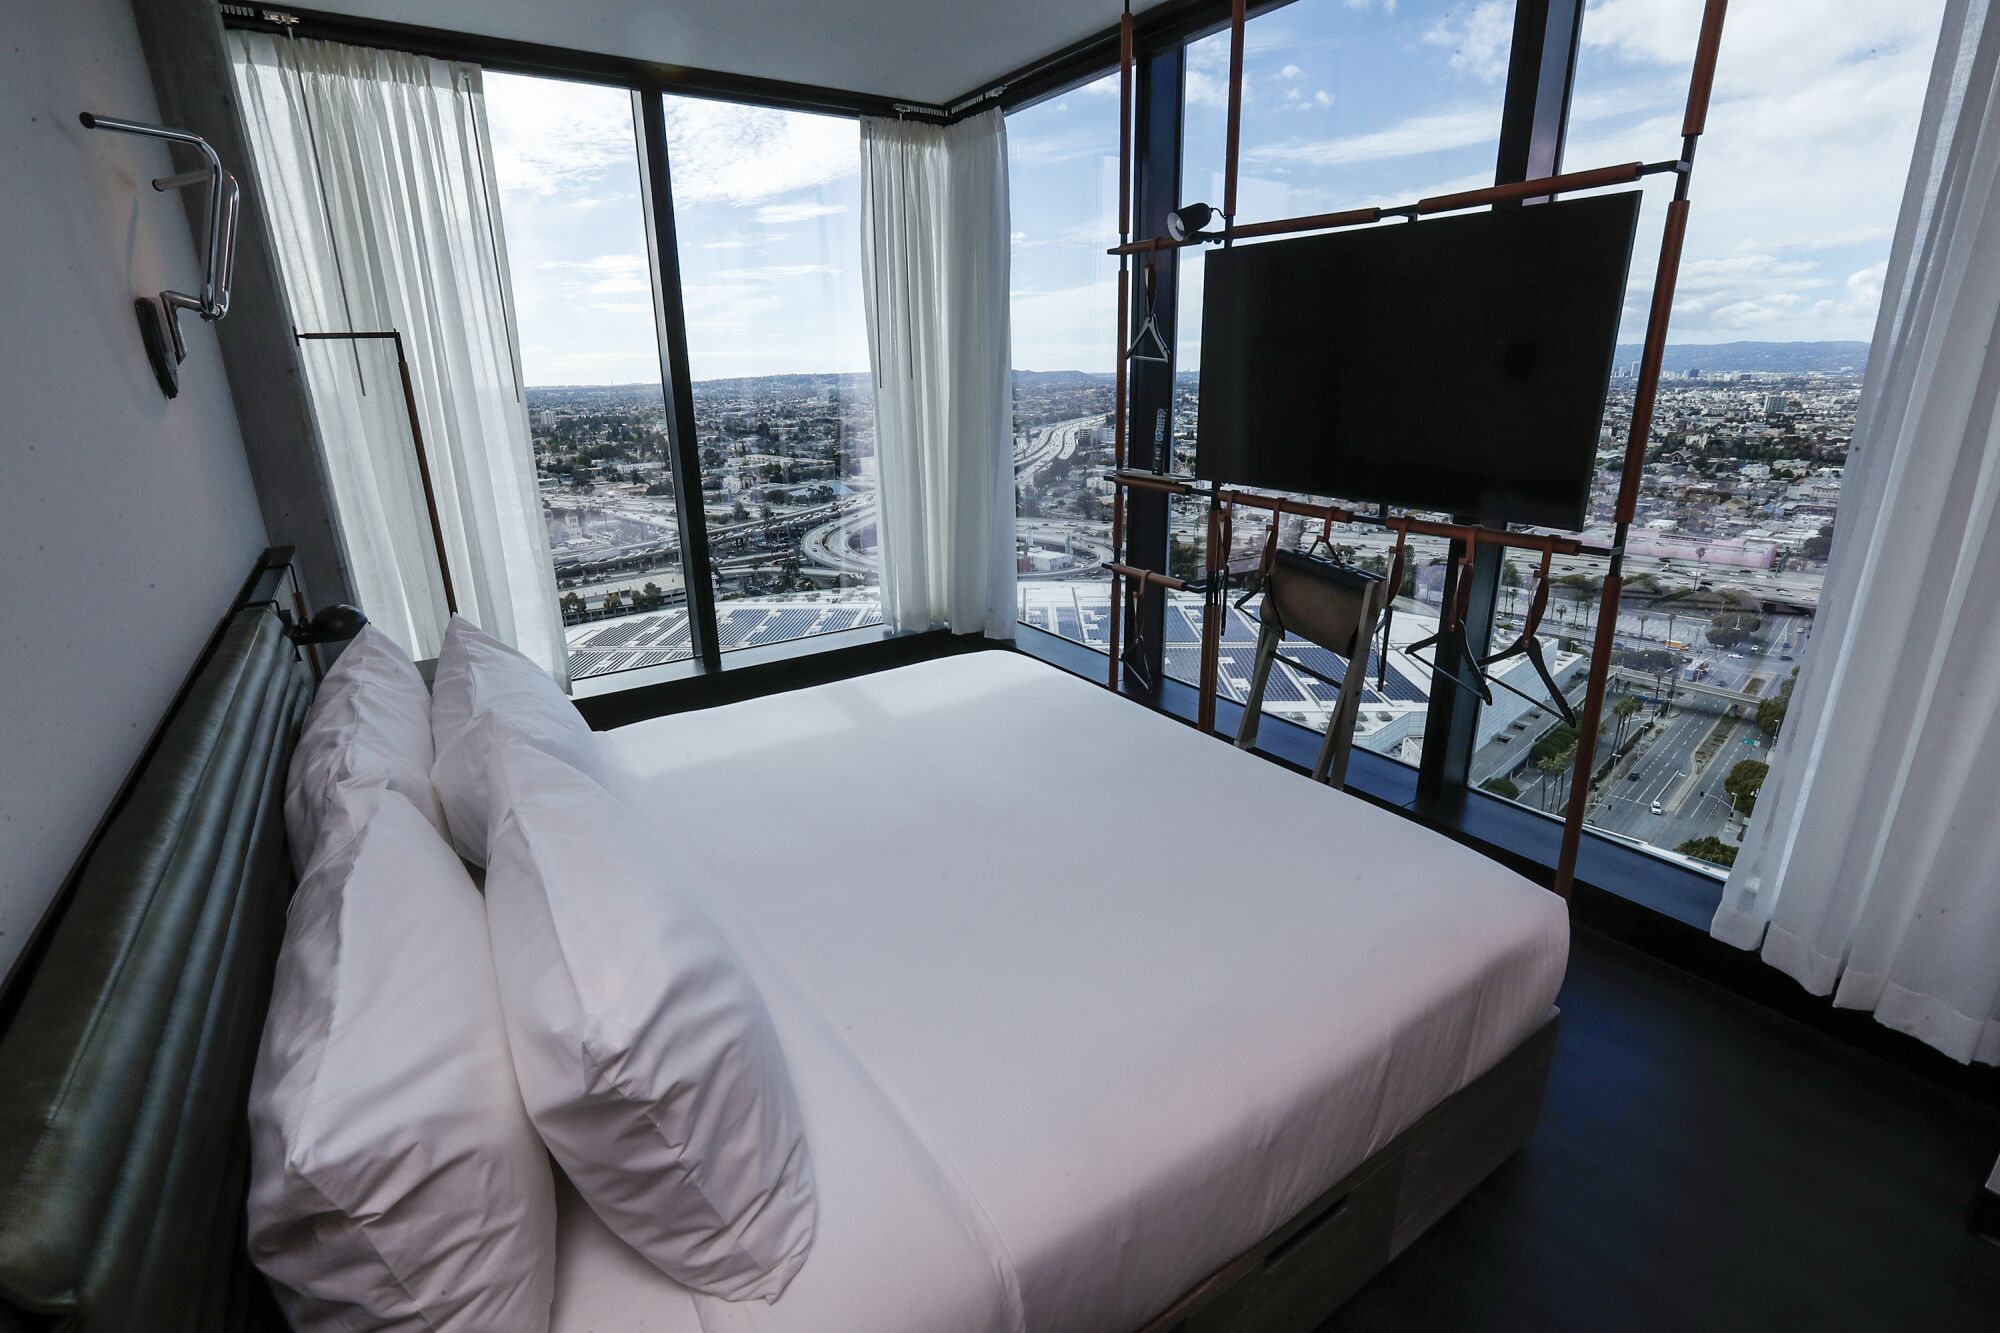 A room at the Moxy features sparse decor but a wide-ranging view of downtown L.A.